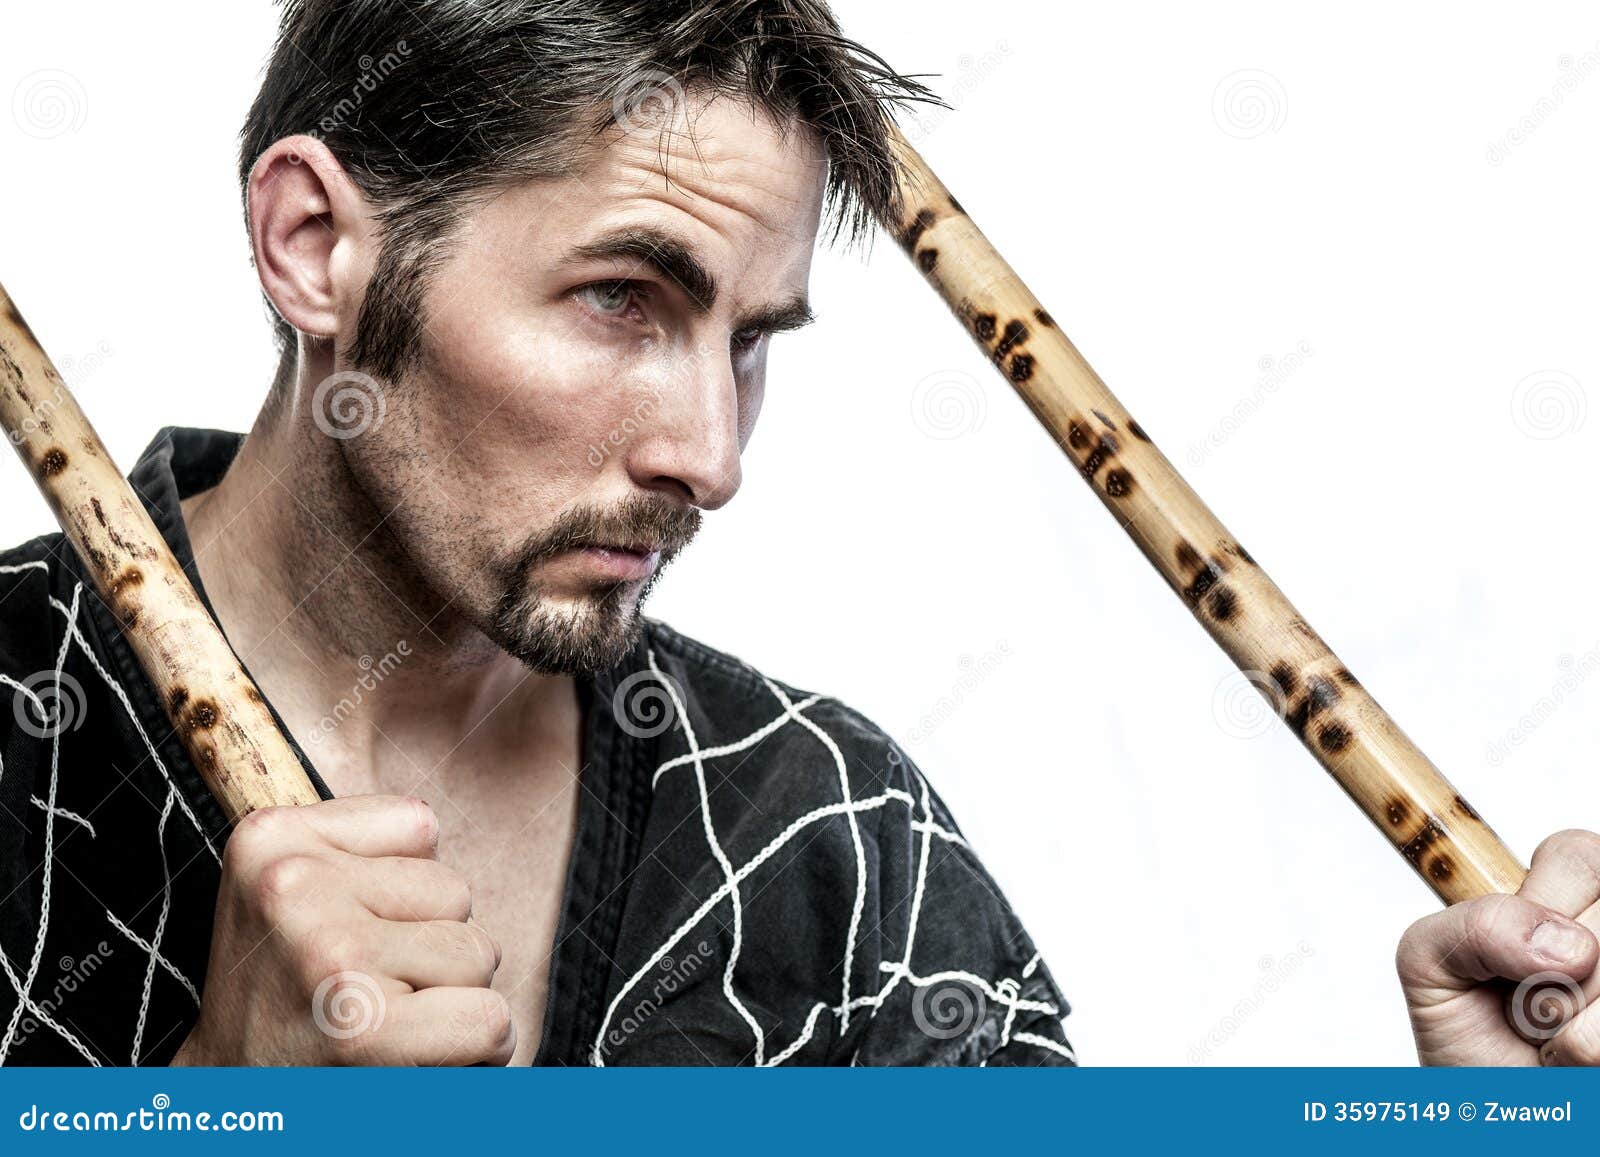 <b>Martial arts</b> master with bamboo sticks Royalty Free Stock Images - martial-arts-master-bamboo-sticks-black-combat-dress-two-short-isolated-white-background-35975149